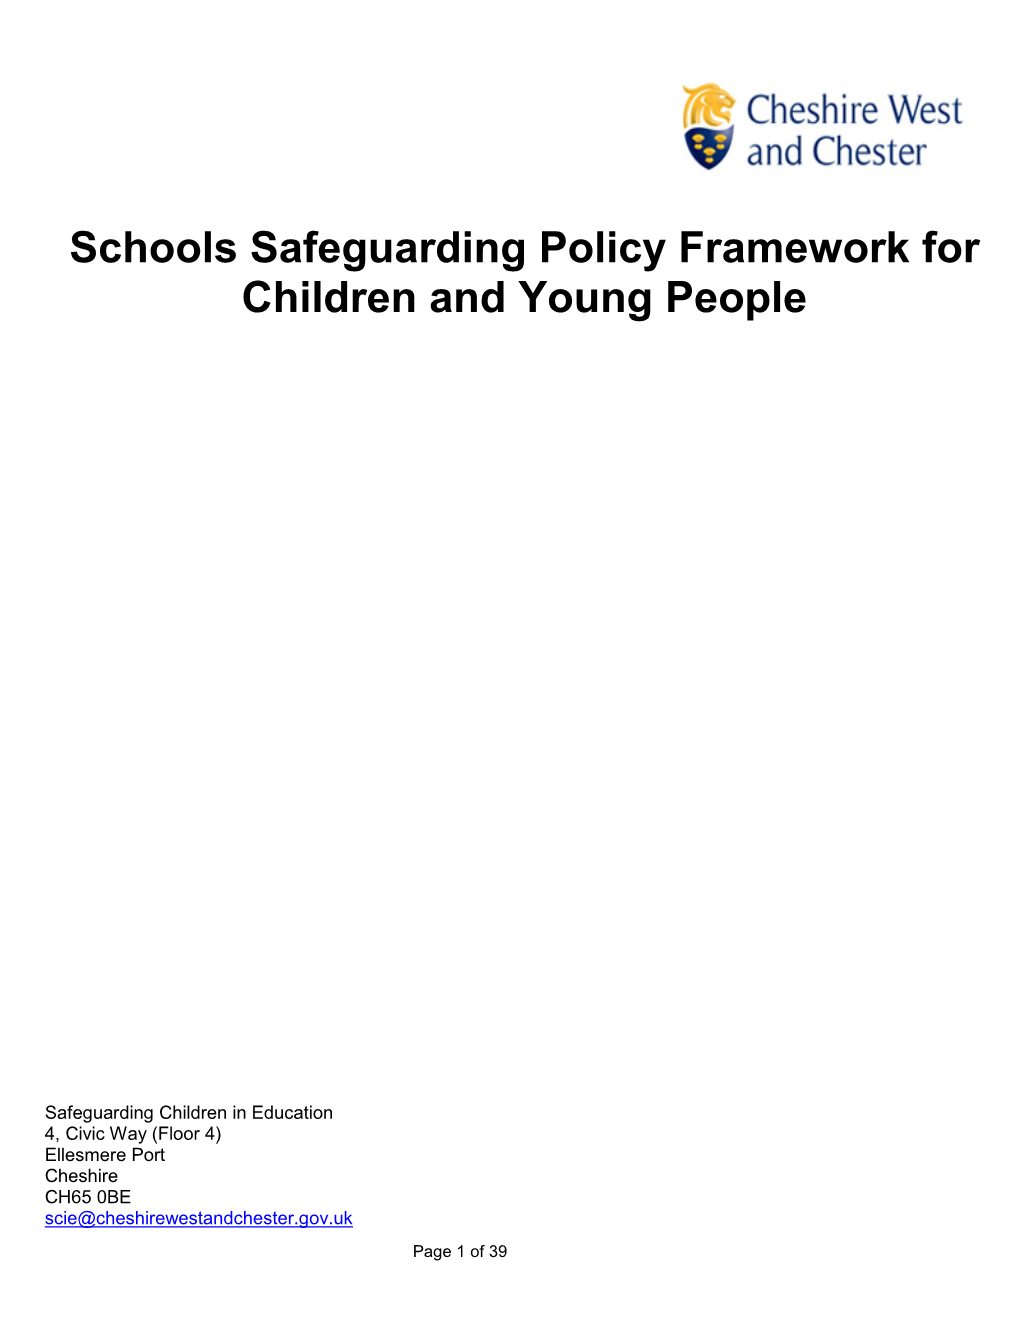 Schools Safeguarding Policy Framework for Children and Young People